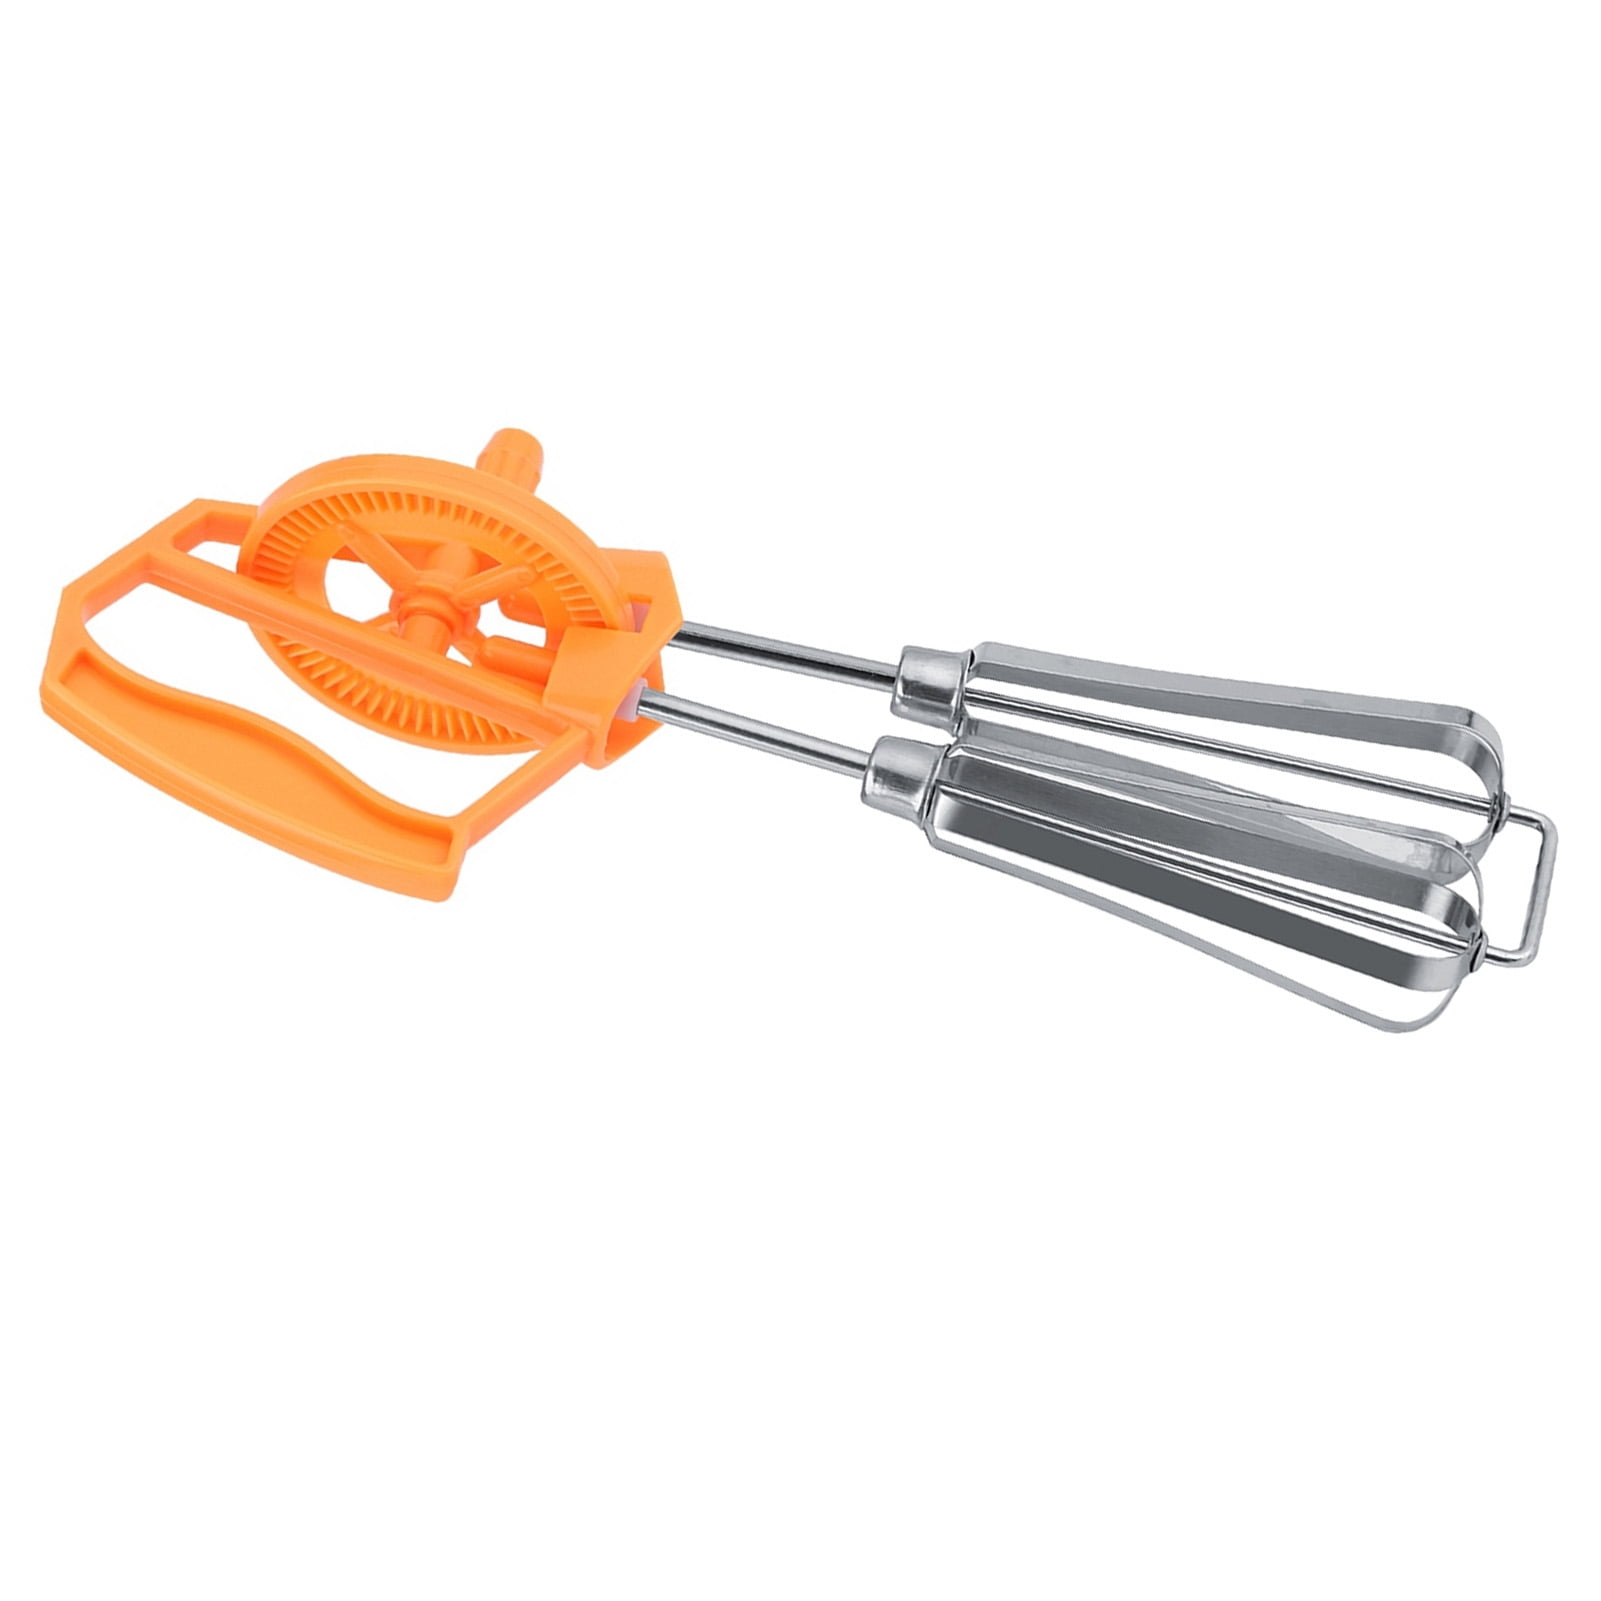 Manual Hand Mixer with Hand Crank, Stainless Steel Hand Mixer Whisk  Rotating Foam Beater for Kitchen Cooking and Baking (Orange)